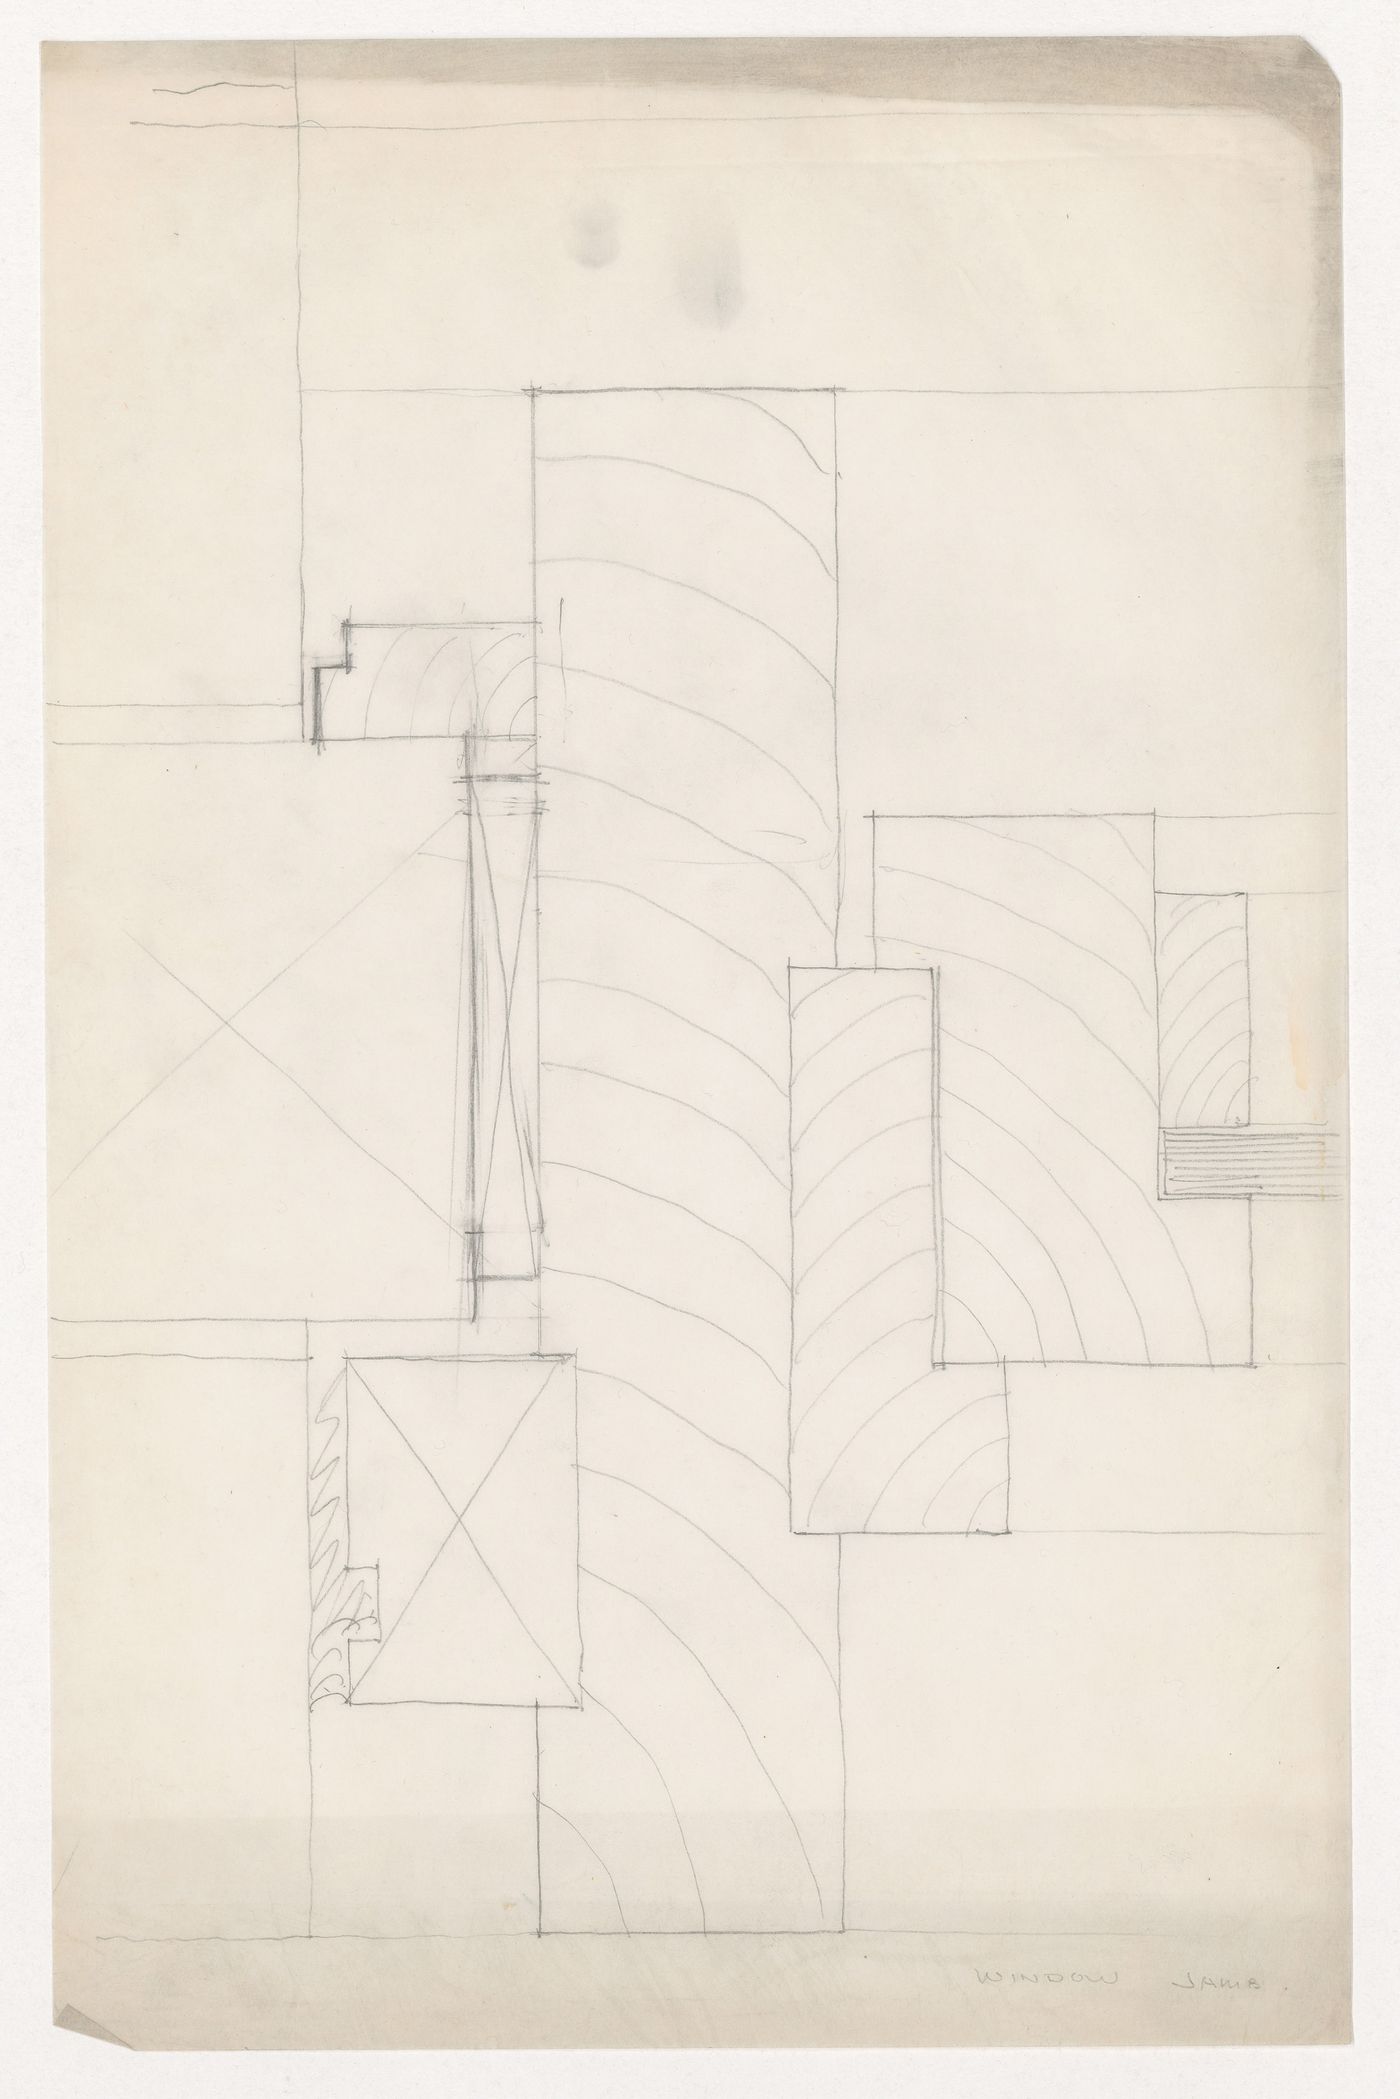 Sketch sectional detail, possibly for a window jamb for the Metallurgy Building, Illinois Institute of Technology, Chicago